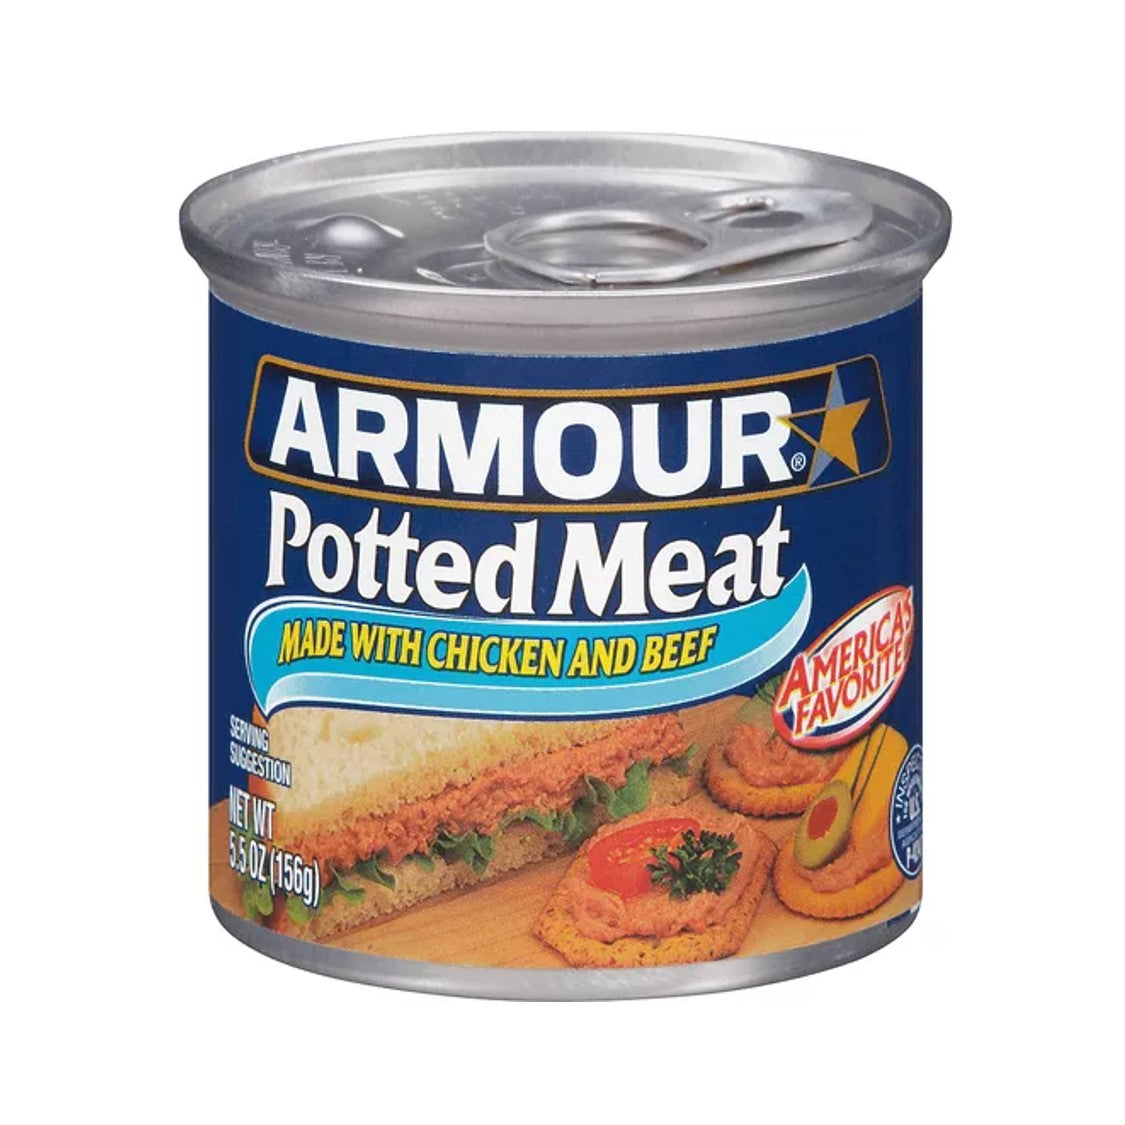 Armour Potted Meat (5 oz)